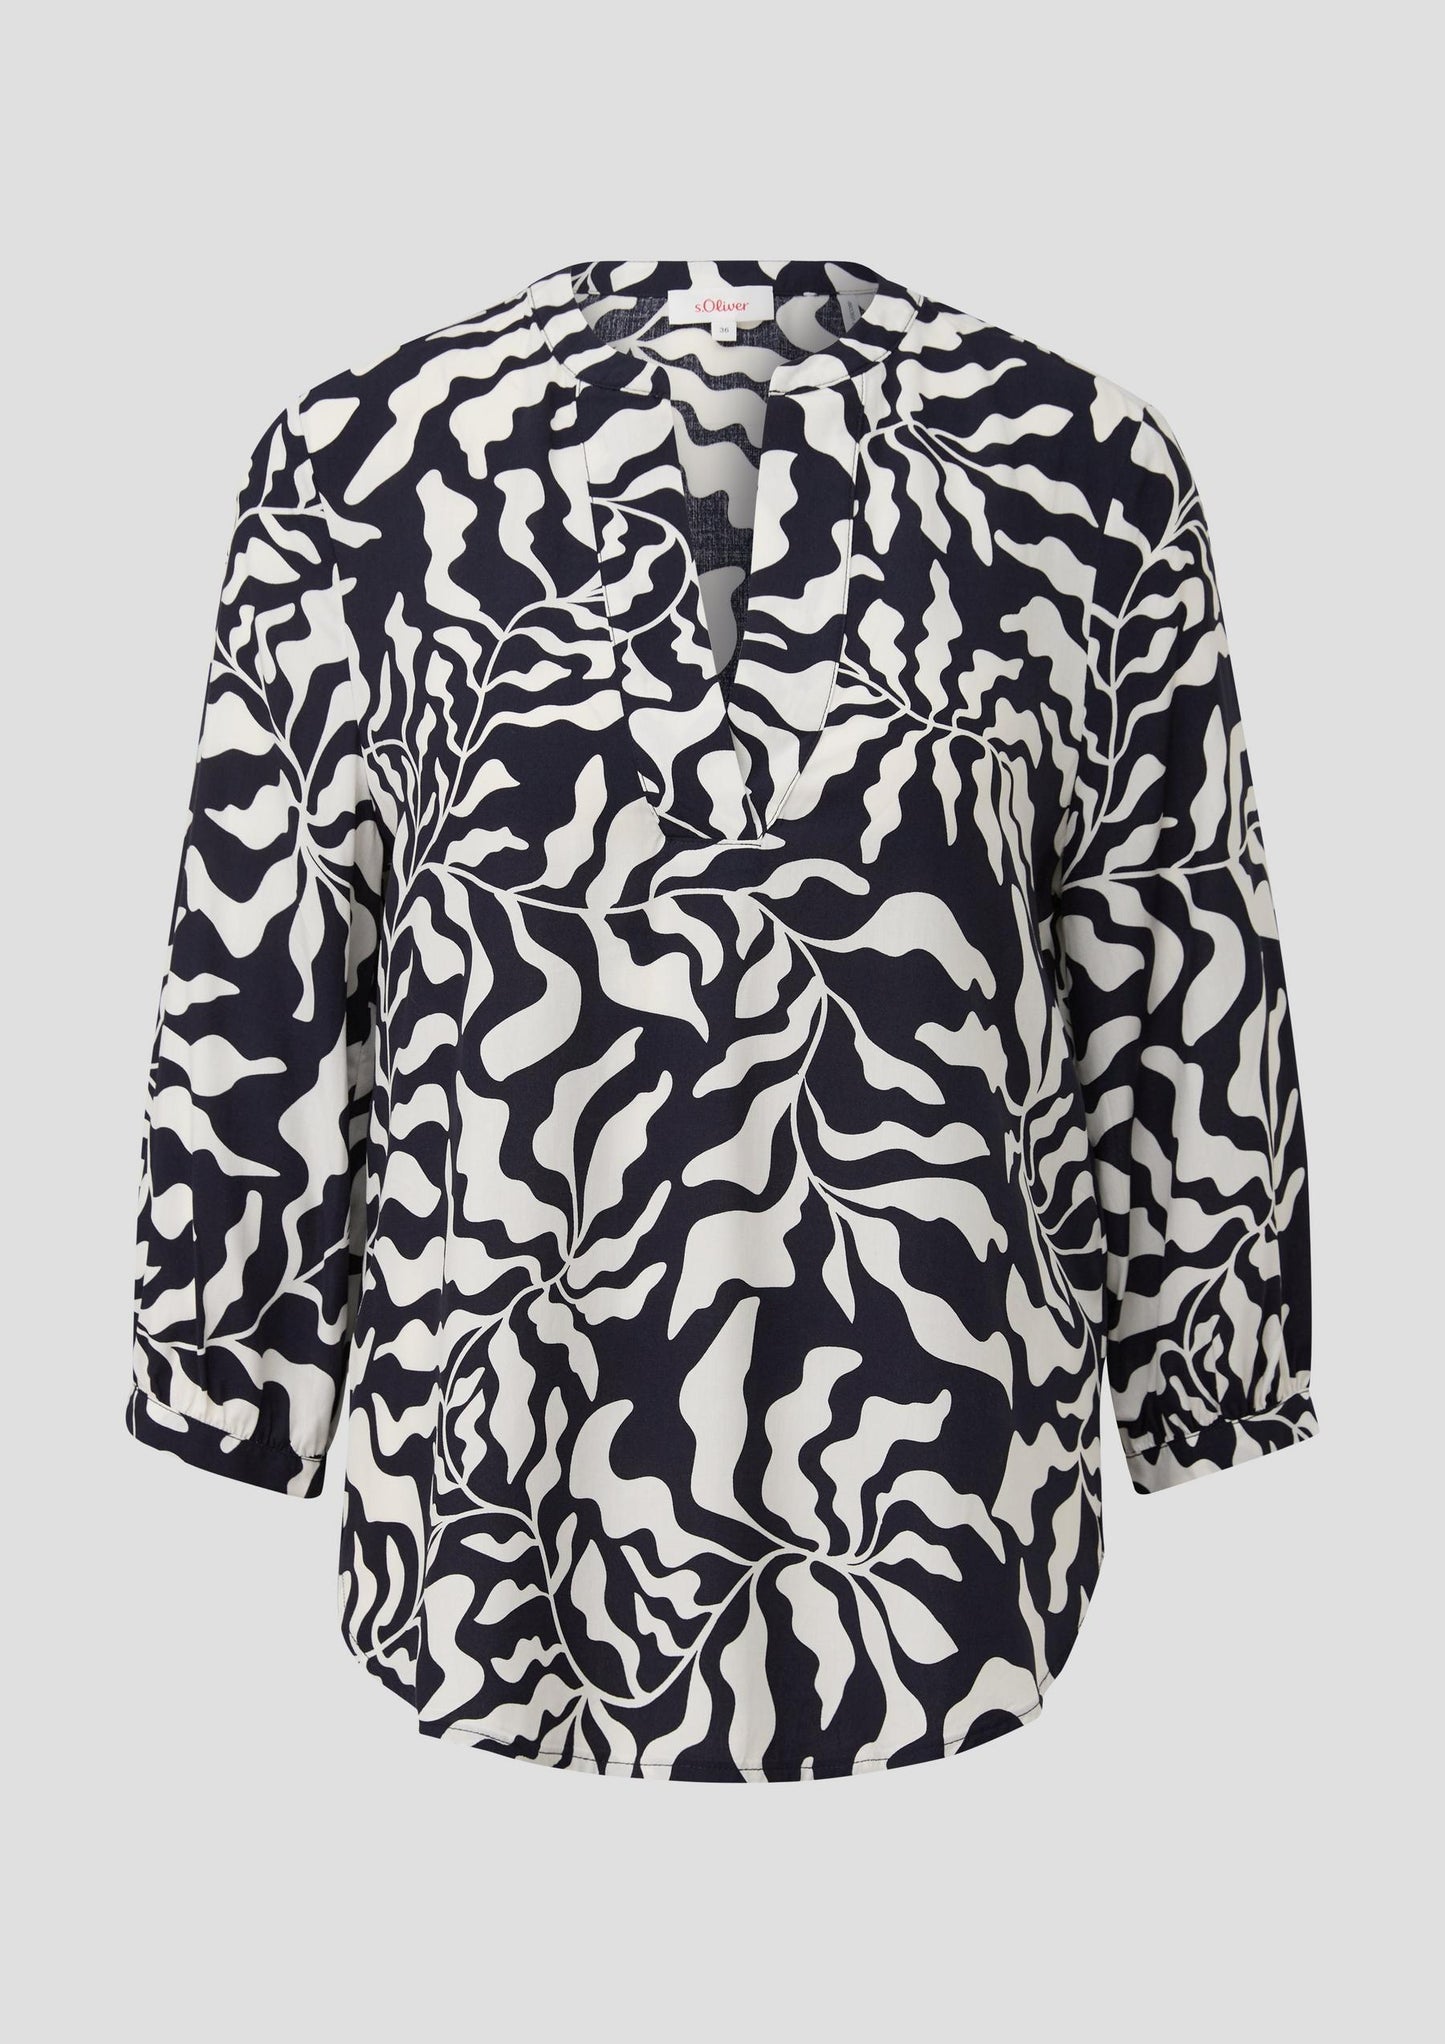 s.Oliver - Tunikabluse mit All-over-Print - Farbe: navy